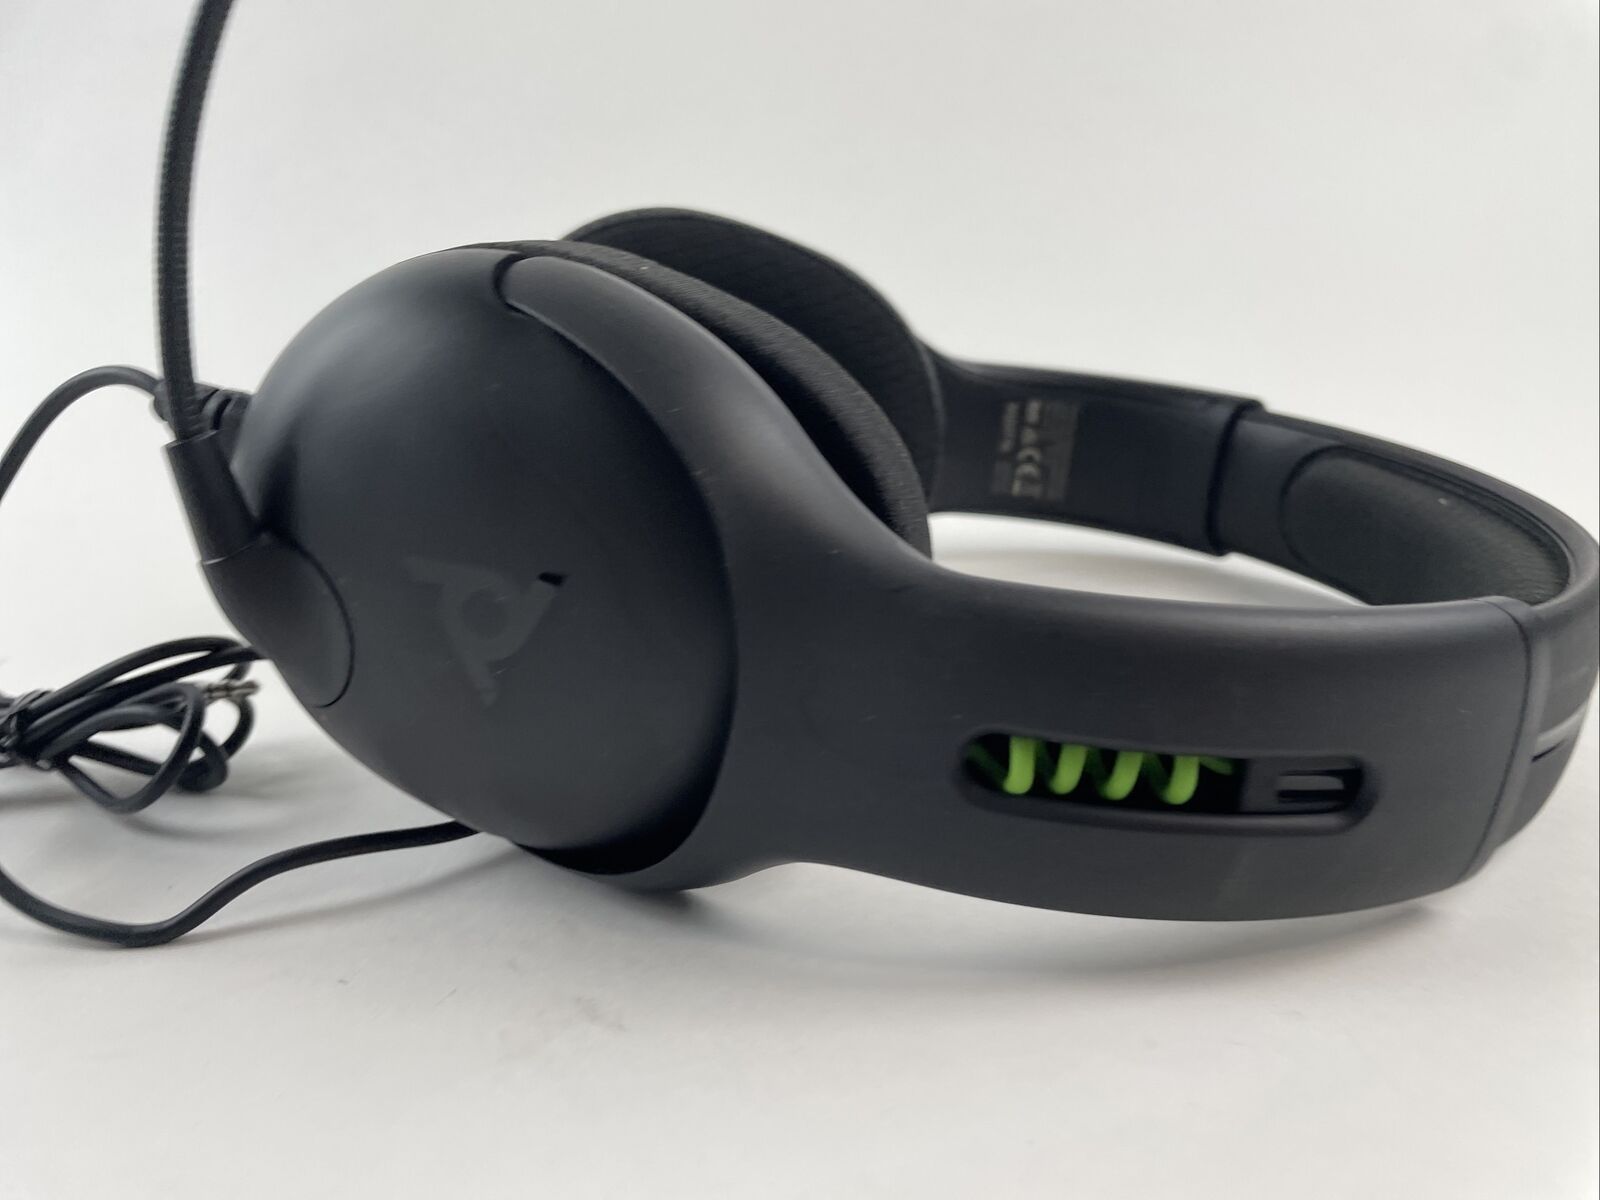 PDP LVL50 Wired Stereo Headset Review: Good for the Price, But You Can Do  Better